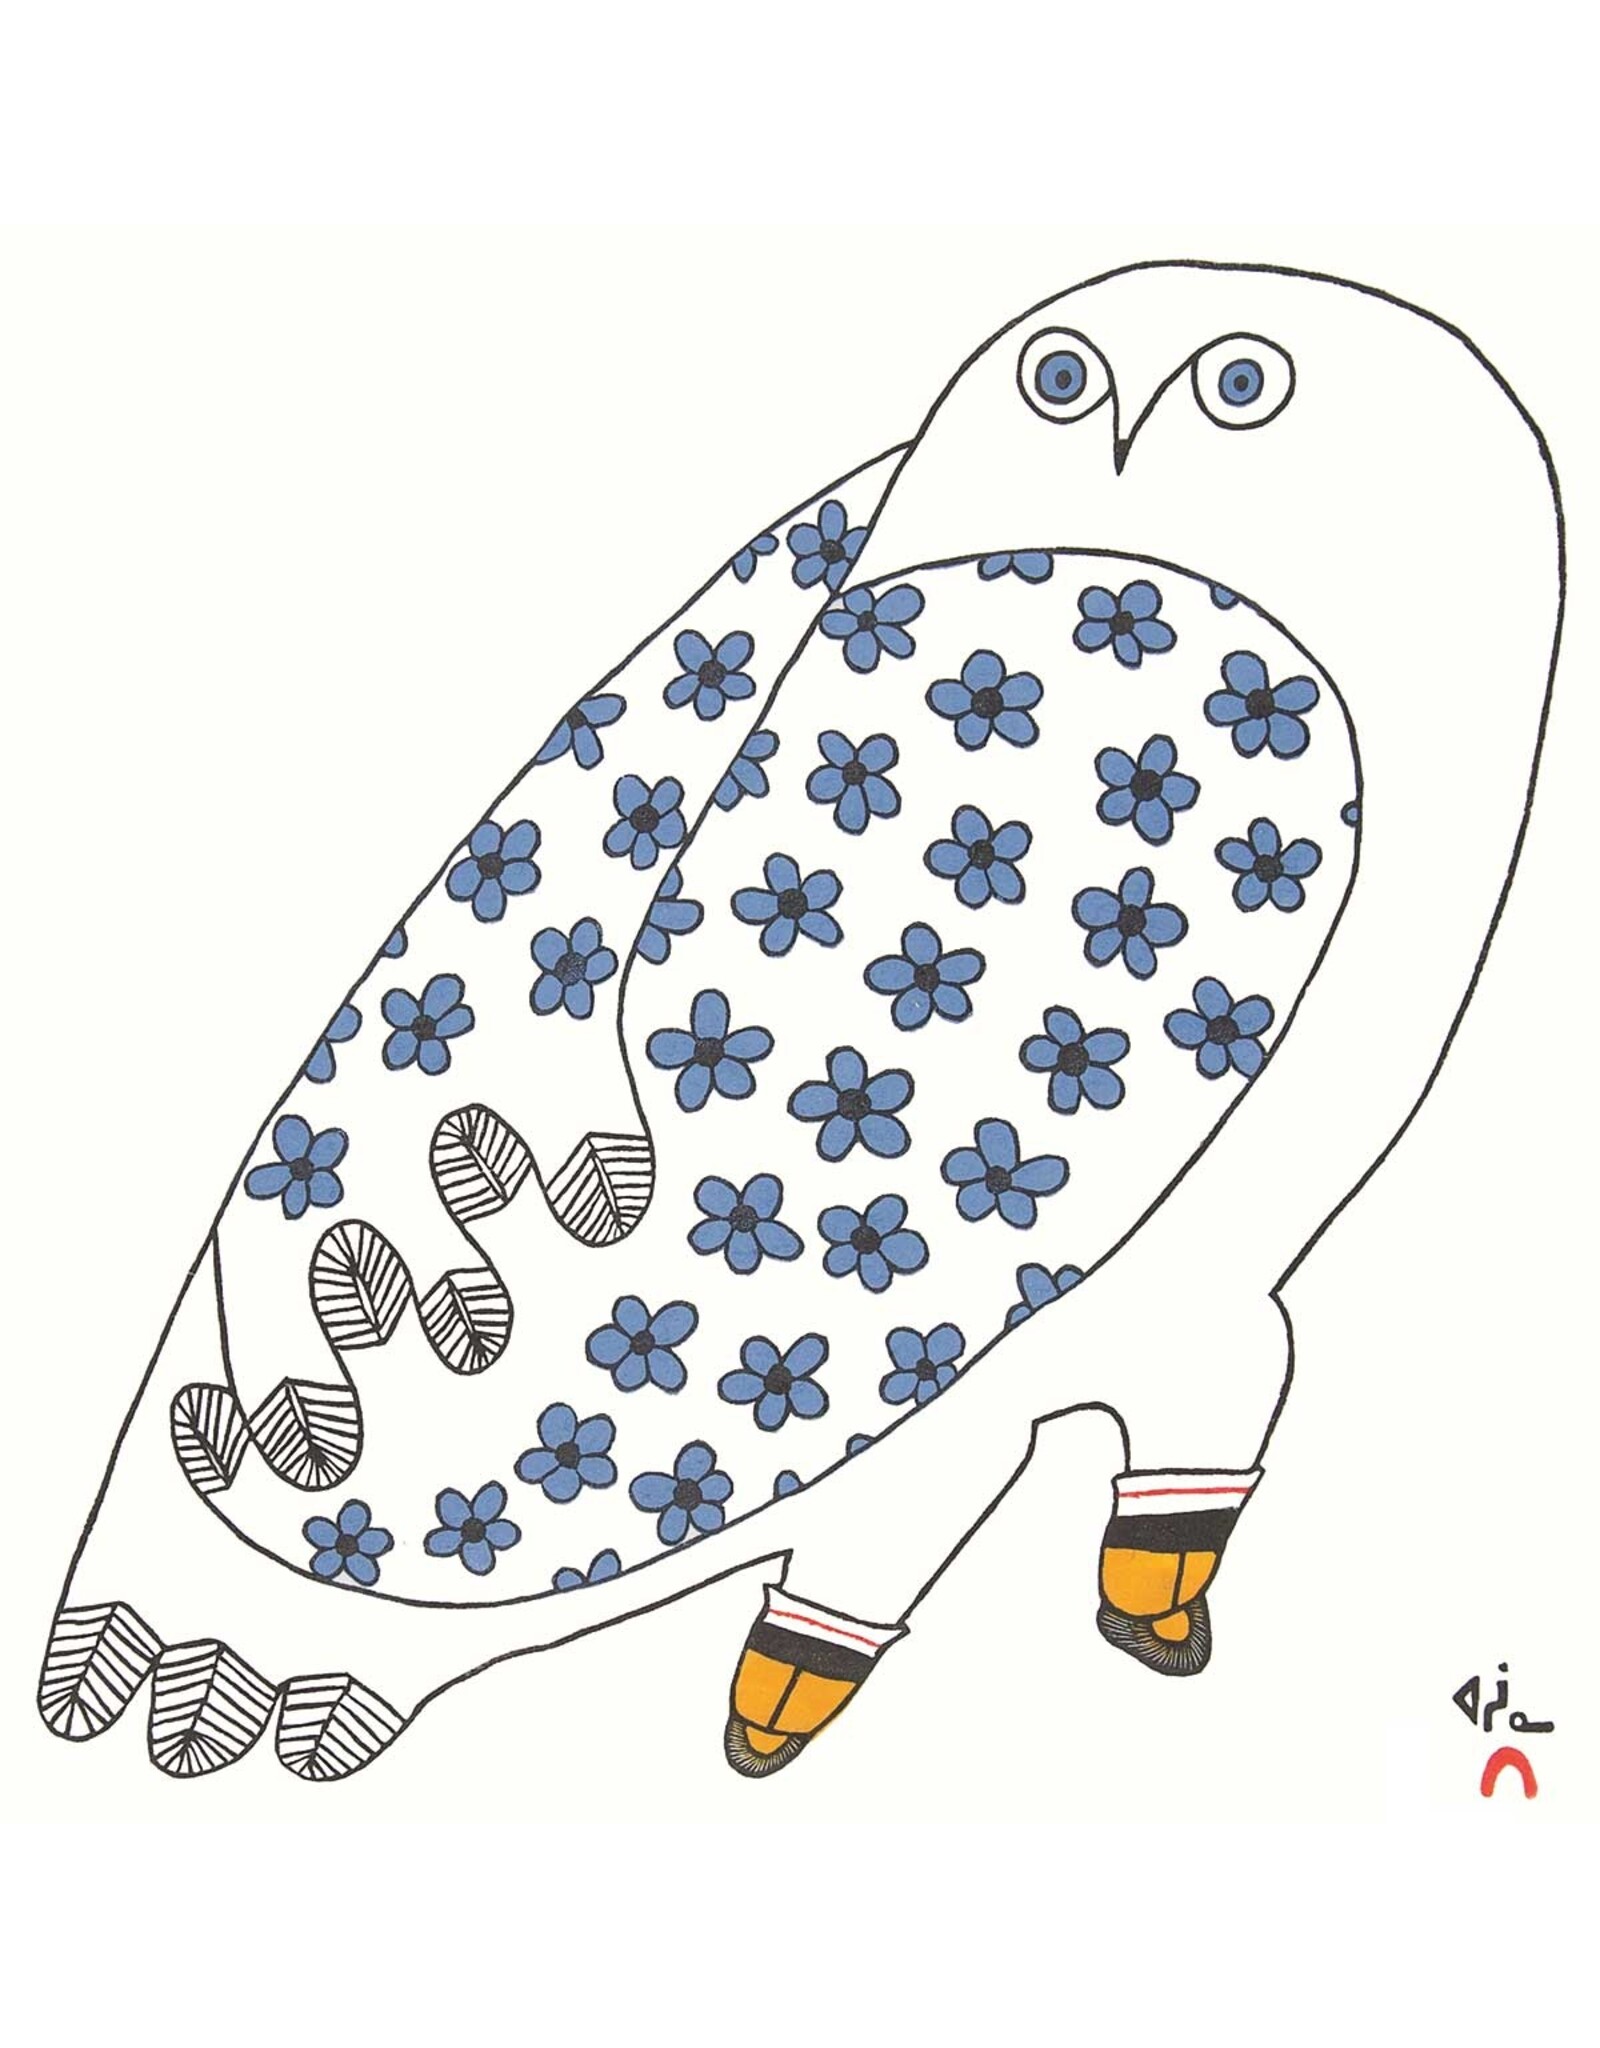 Blossoming Owl by Ningeokuluk Teevee Matted